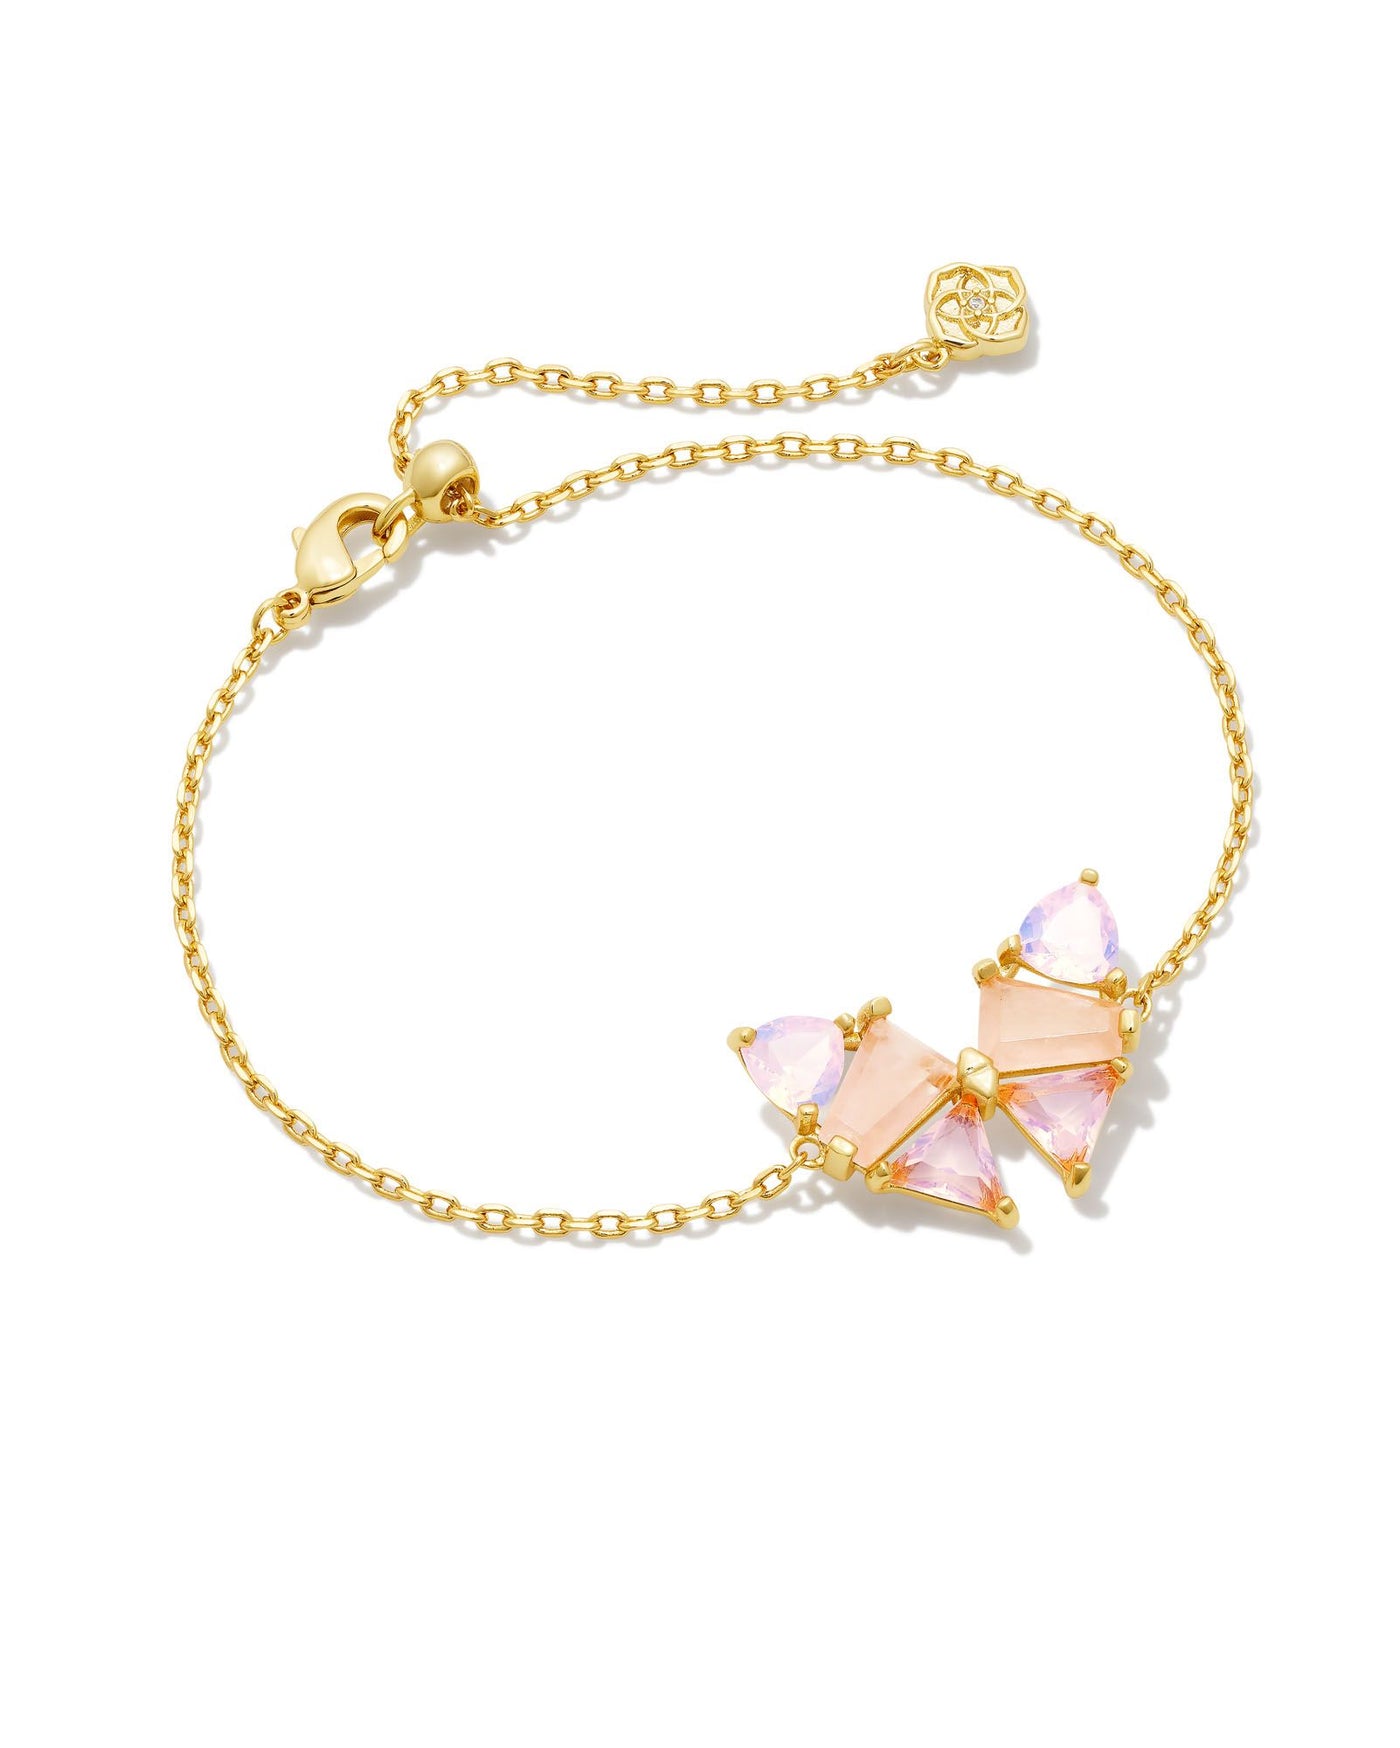 Kendra Scott Blair Delicate Chain Bracelet-Bracelets-Kendra Scott-Market Street Nest, Fashionable Clothing, Shoes and Home Décor Located in Mabank, TX